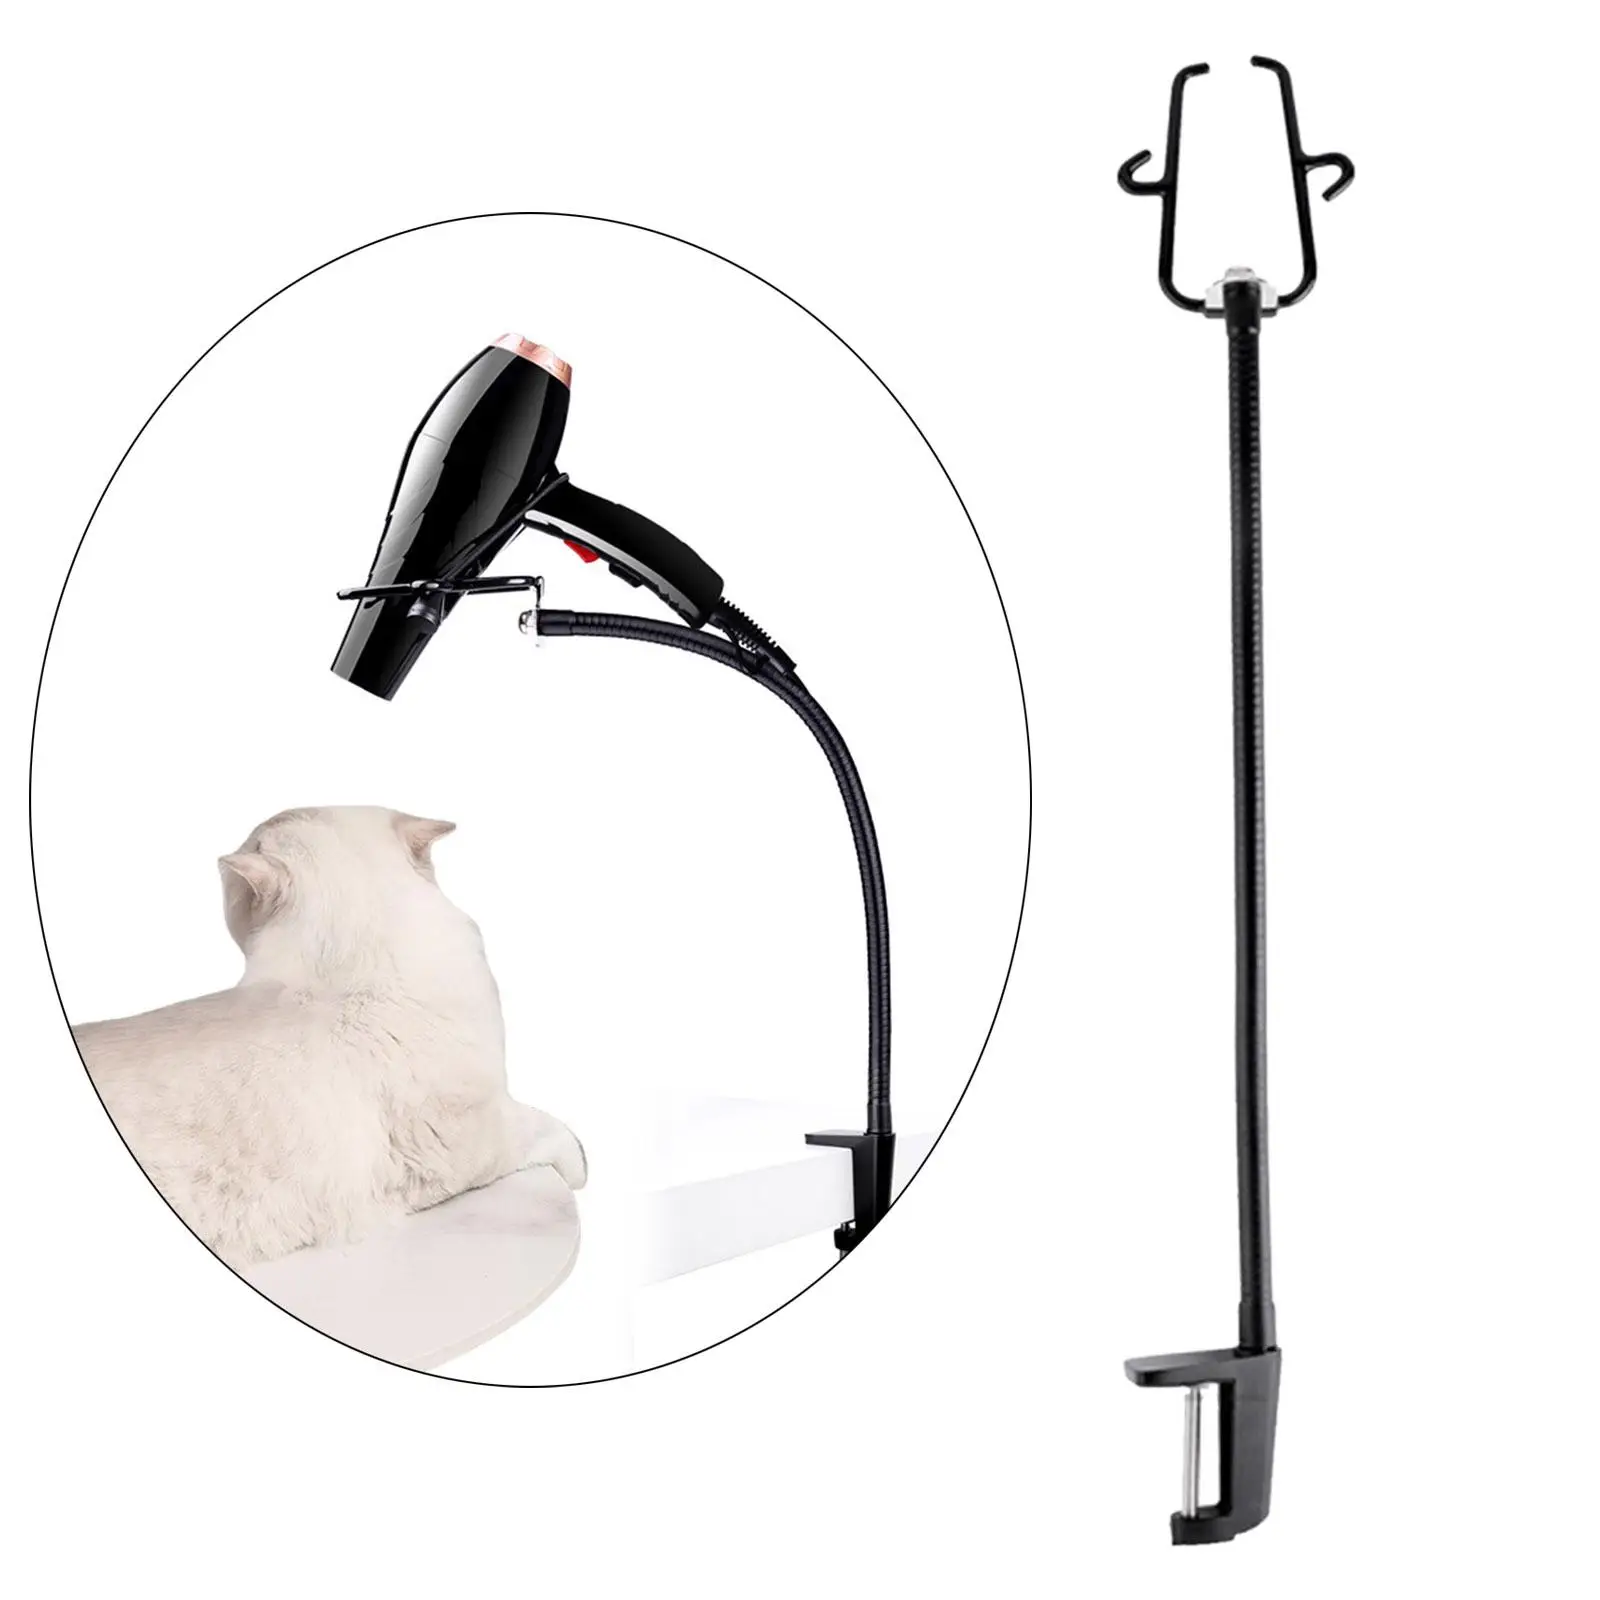 Pet Hair Dryer Stand Fixed Bracket Dog Cat Grooming Table Hair Dryer Support Frame Table Shelf Accessories